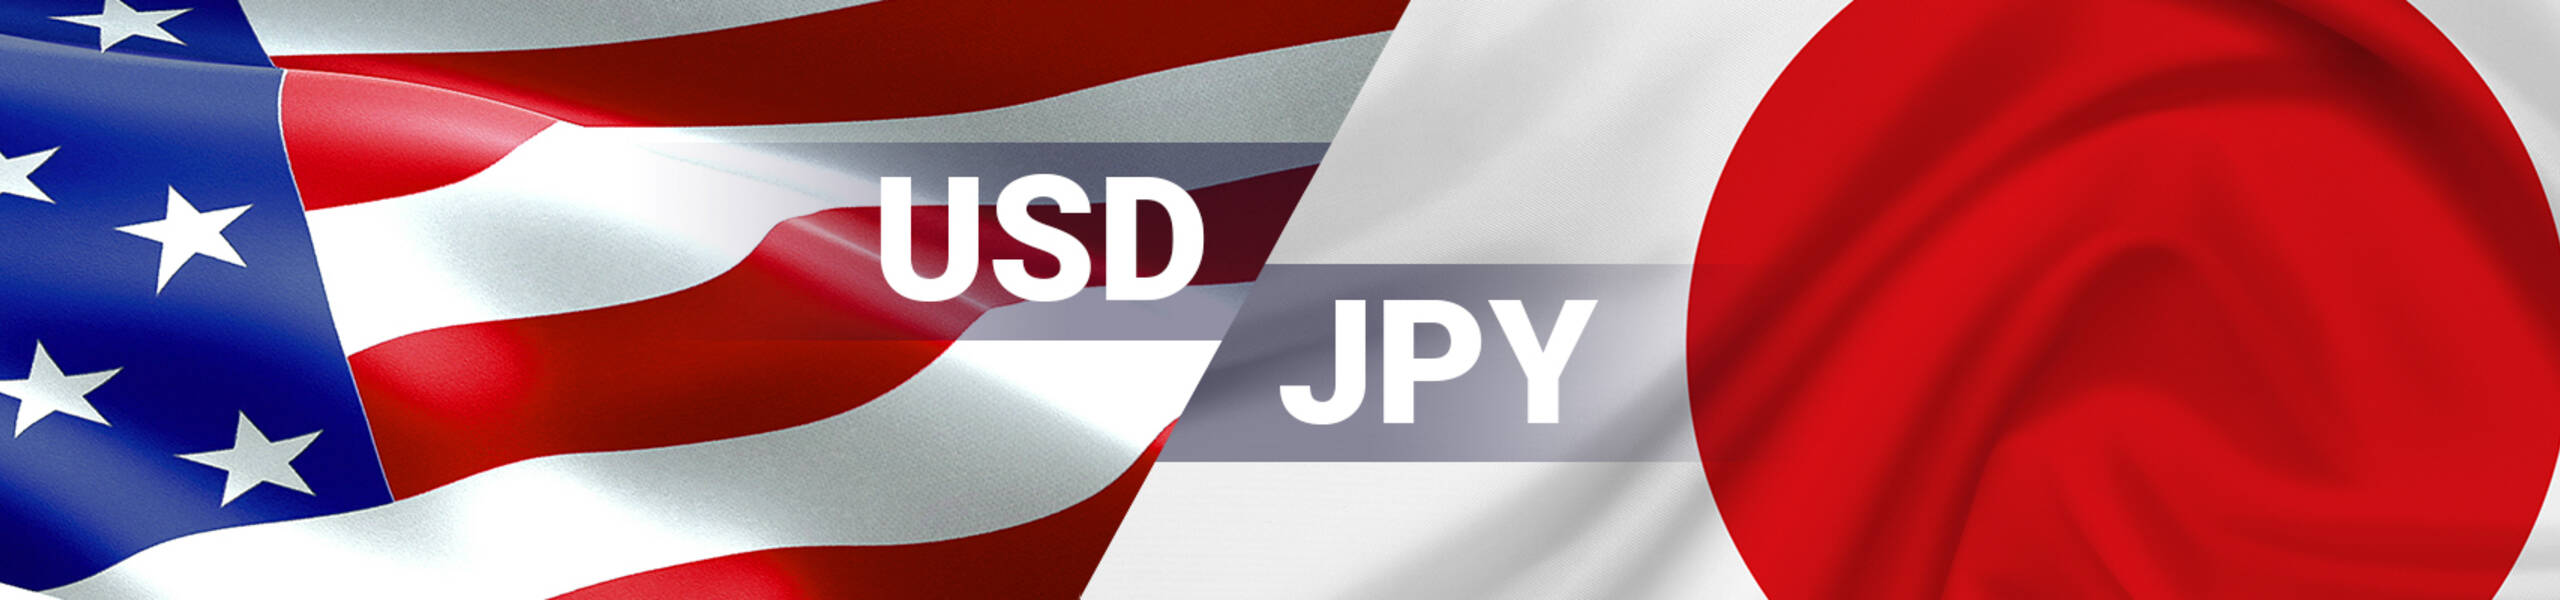 USD/JPY: dollar reached Cloud’s resistance 